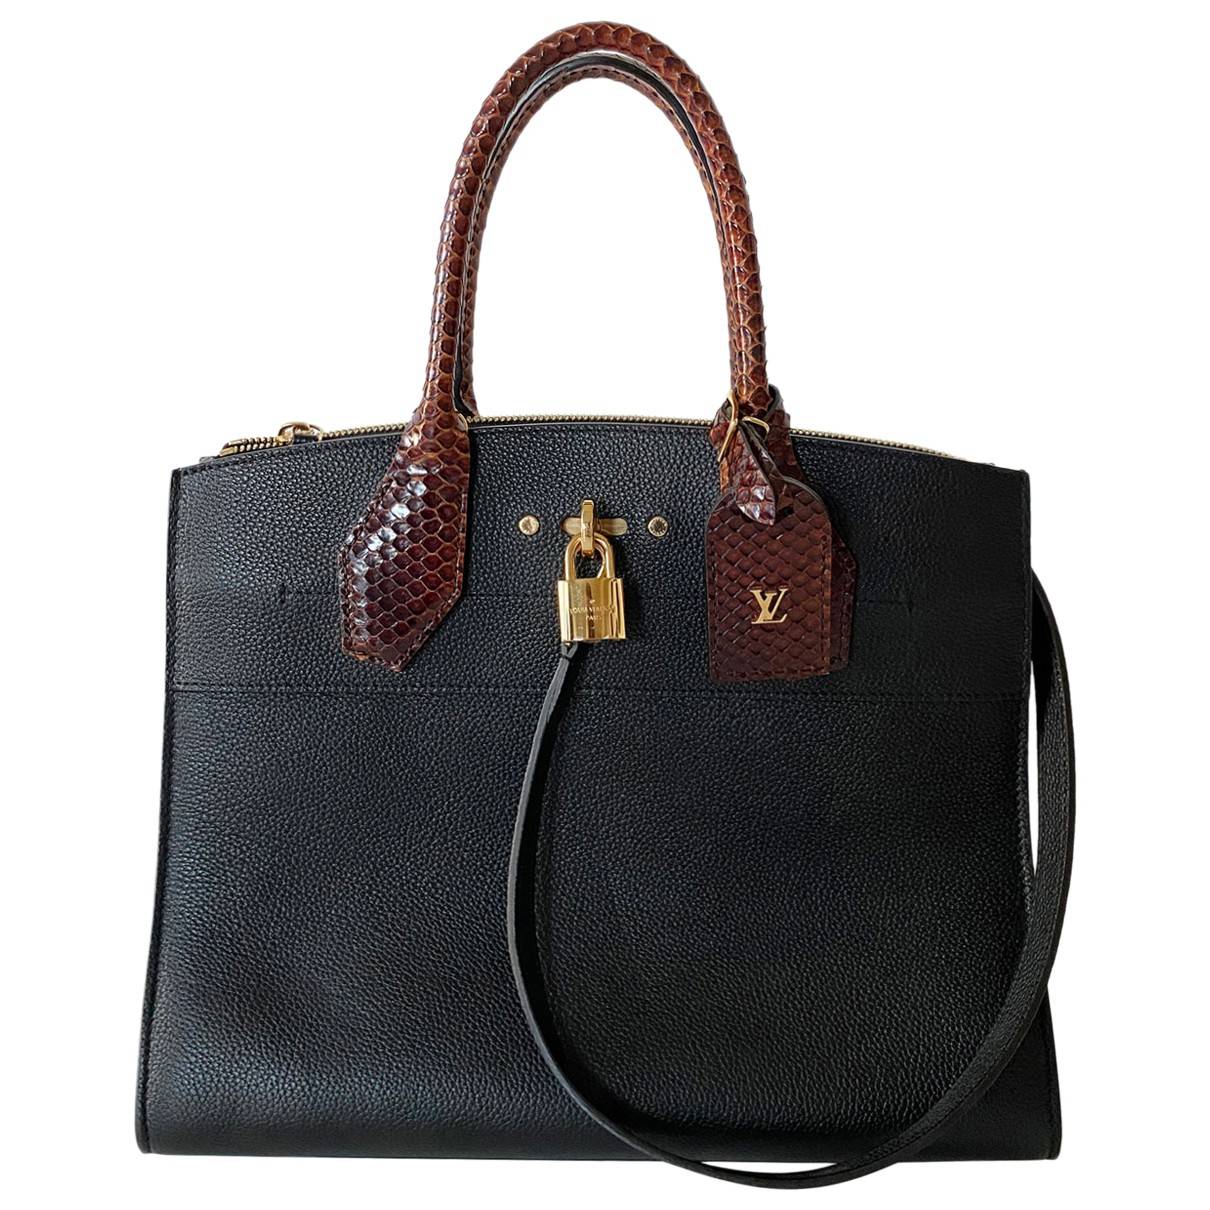 City steamer leather tote Louis Vuitton Black in Leather - 21037184